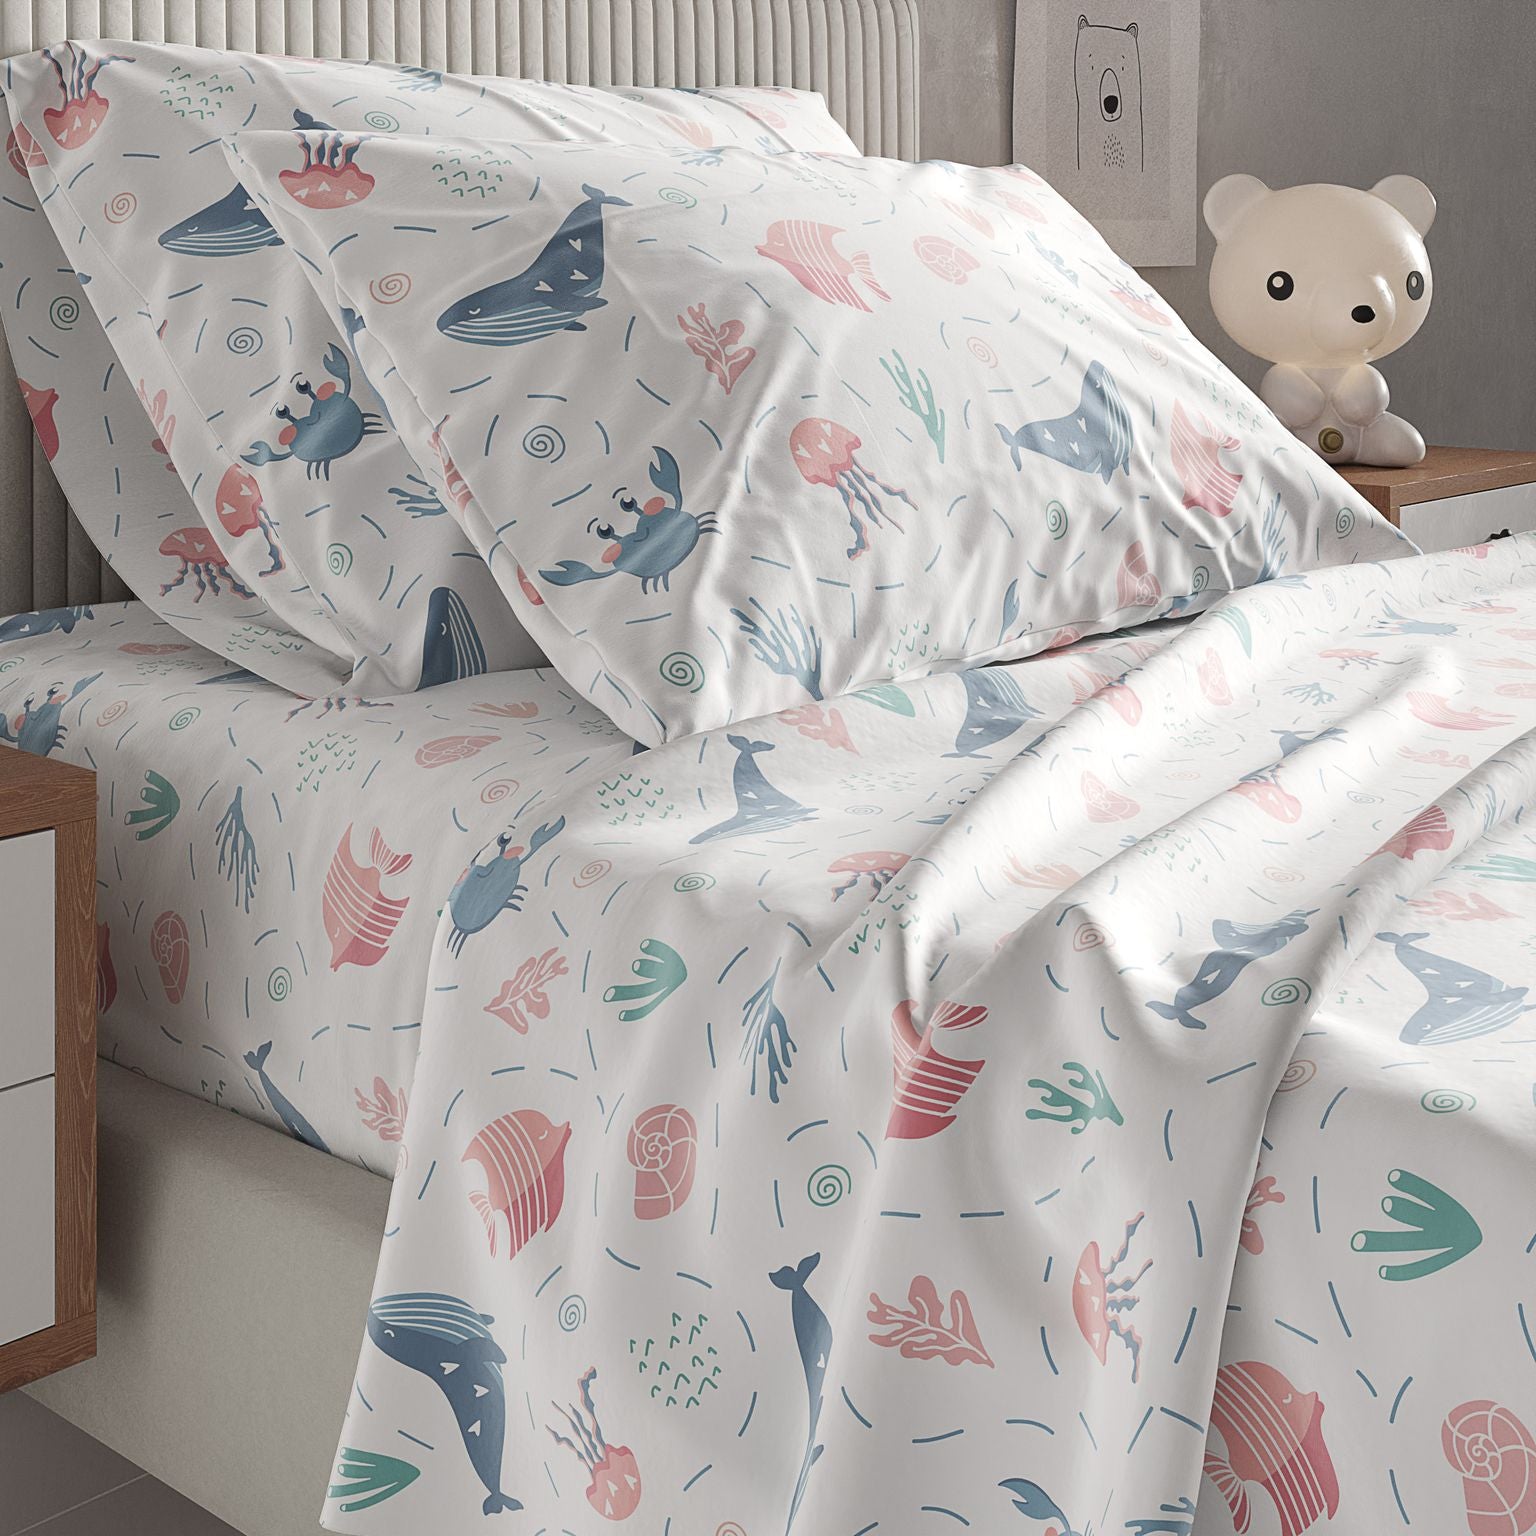 tes New Kids Sheet Set - Fish and Whales